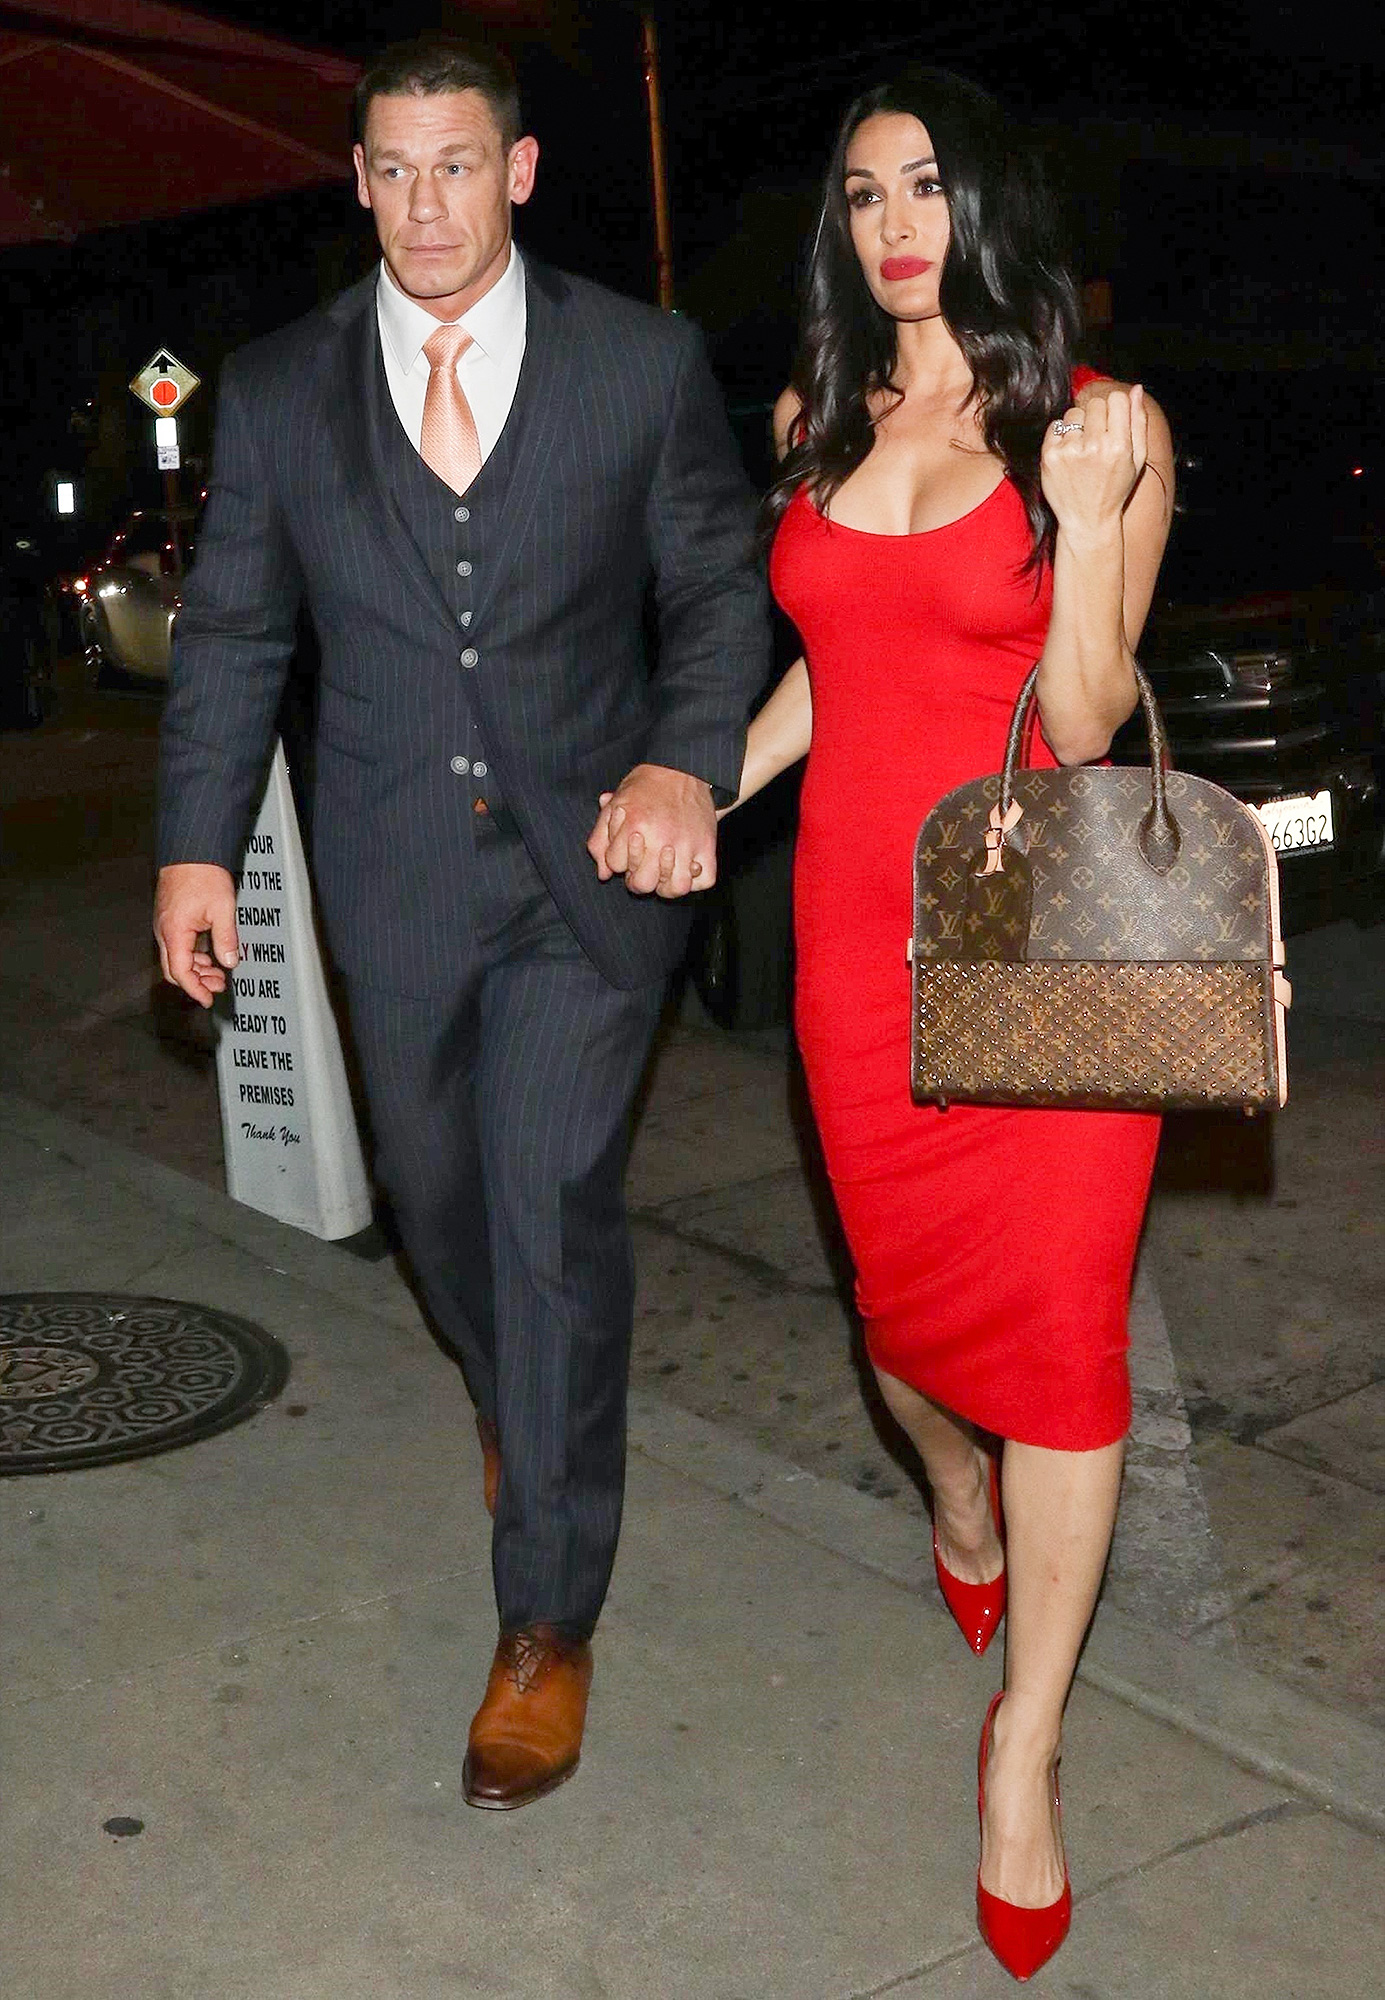 You Can’t See Me: John Cena And Nikki Bella Break Up After 6 Long Years